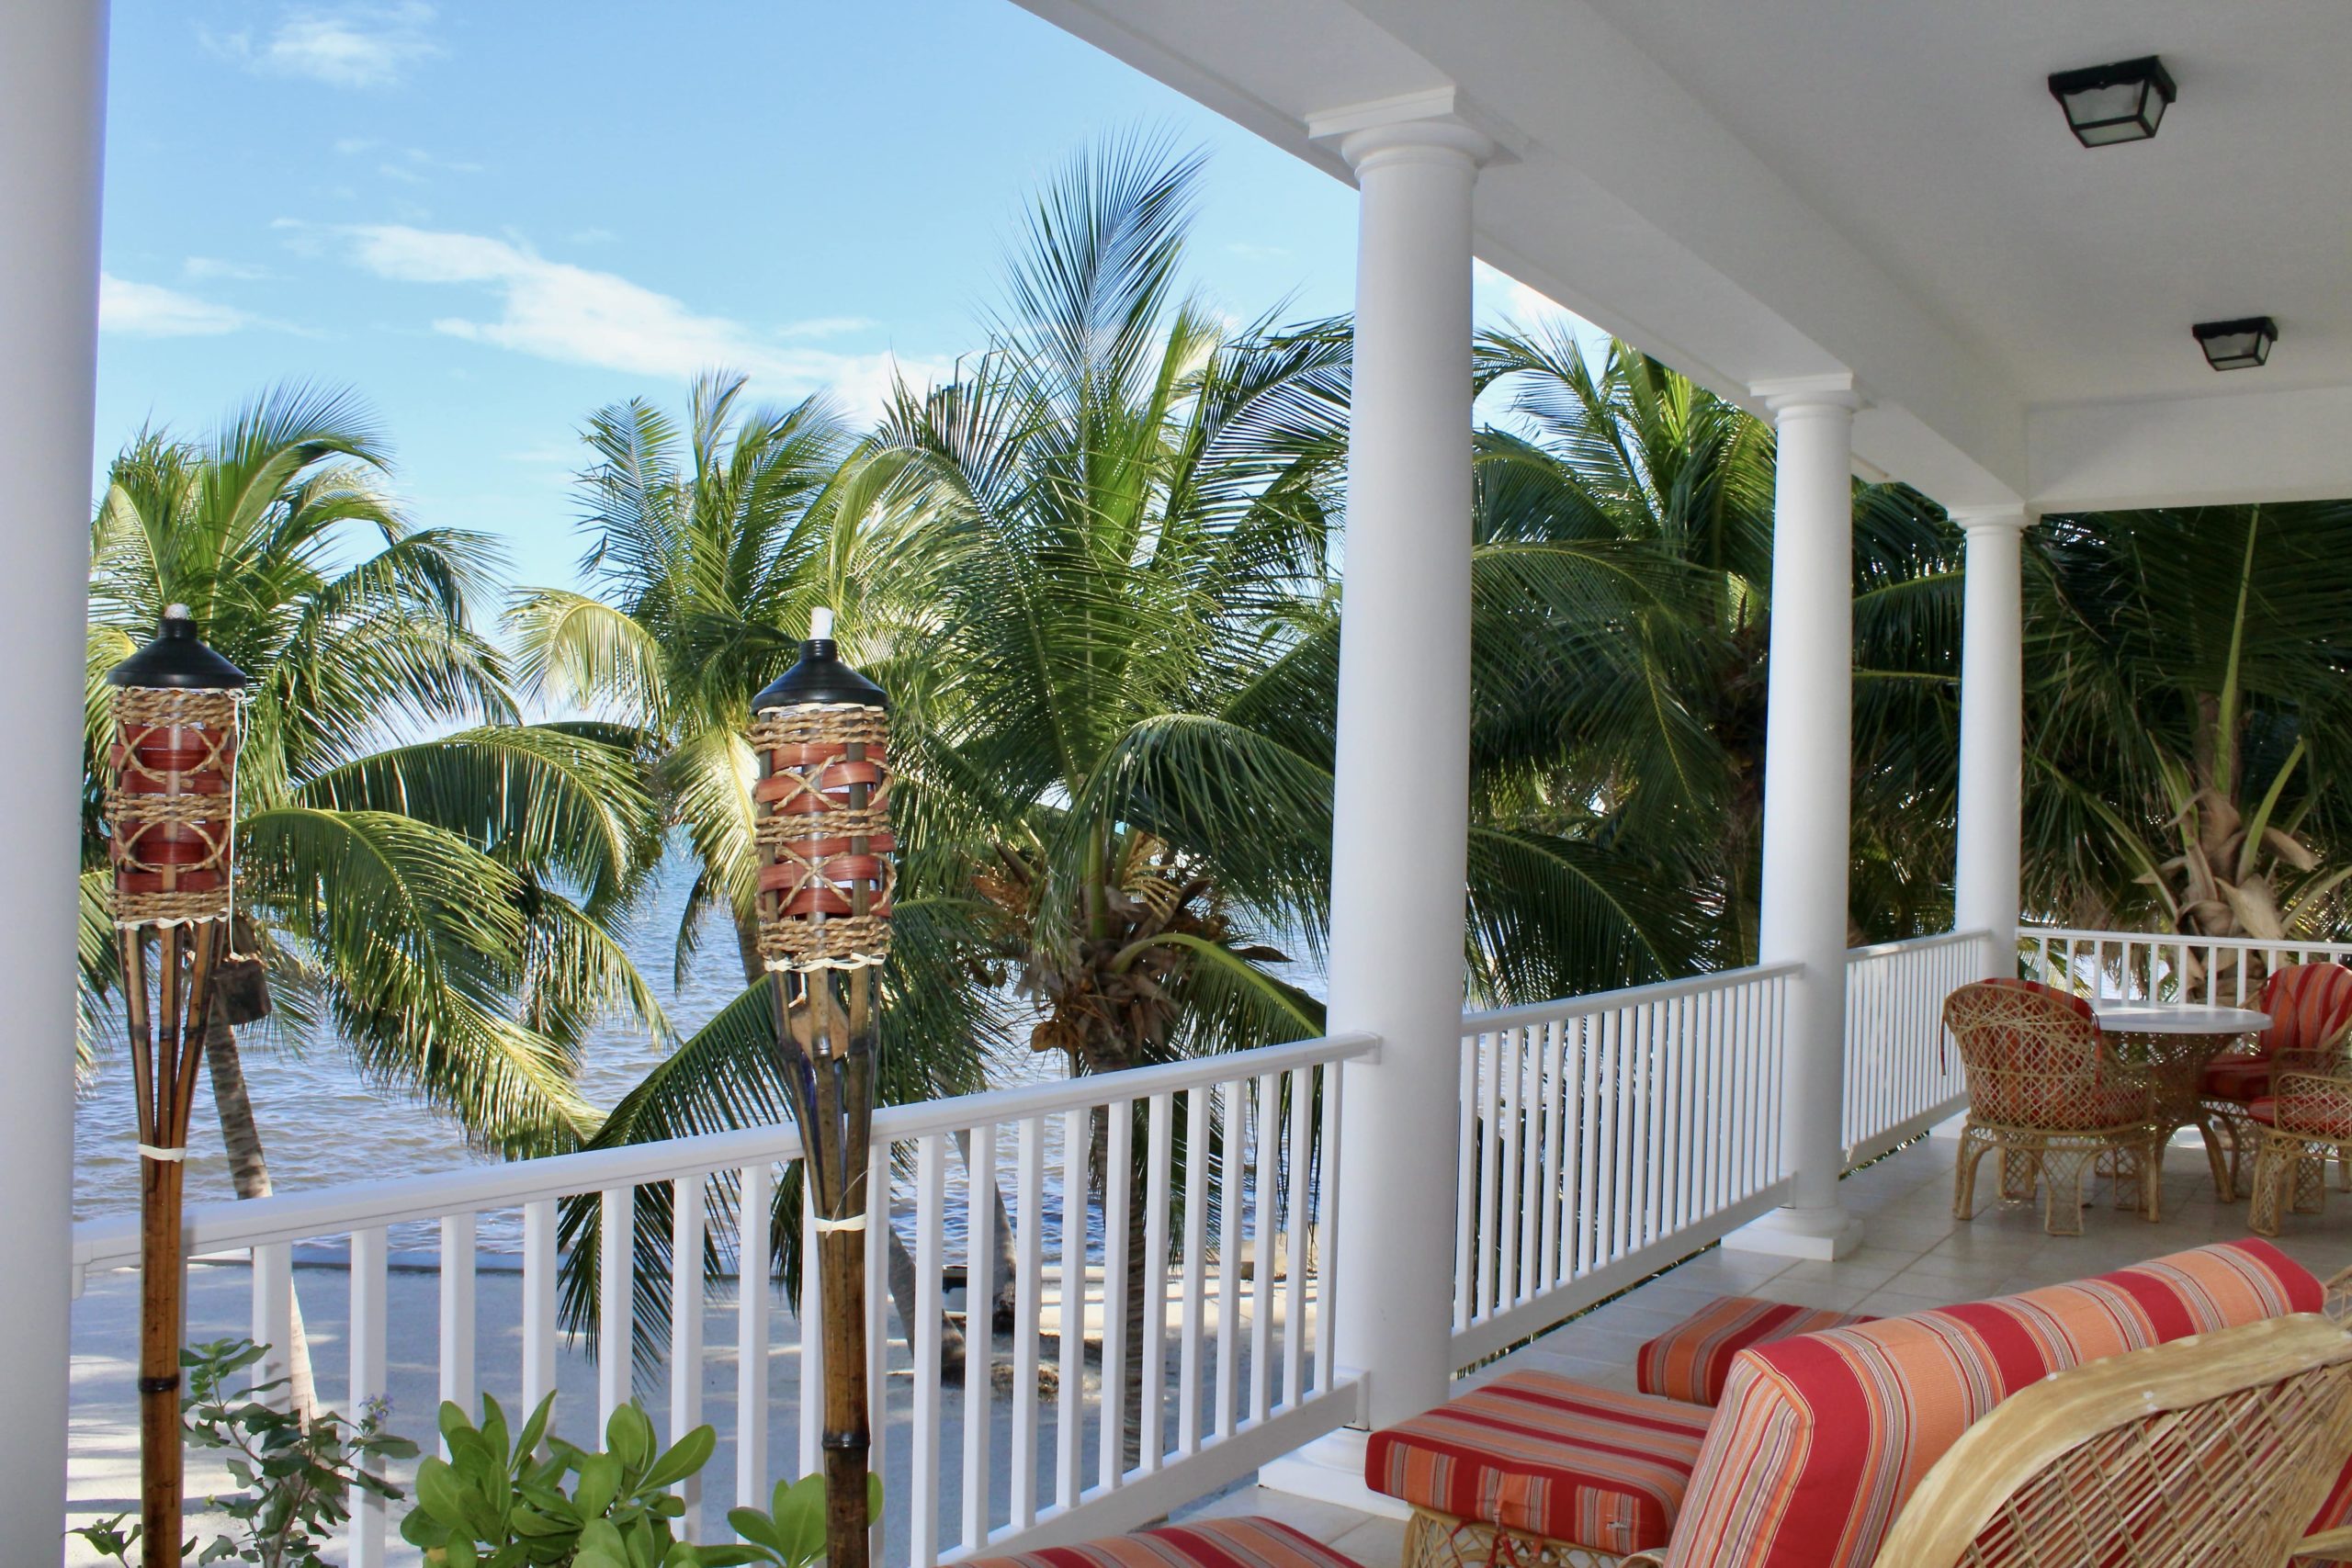 Spectacular view of the Caribbean Sea and palm trees from the second floor balcony at Tara Del Sol